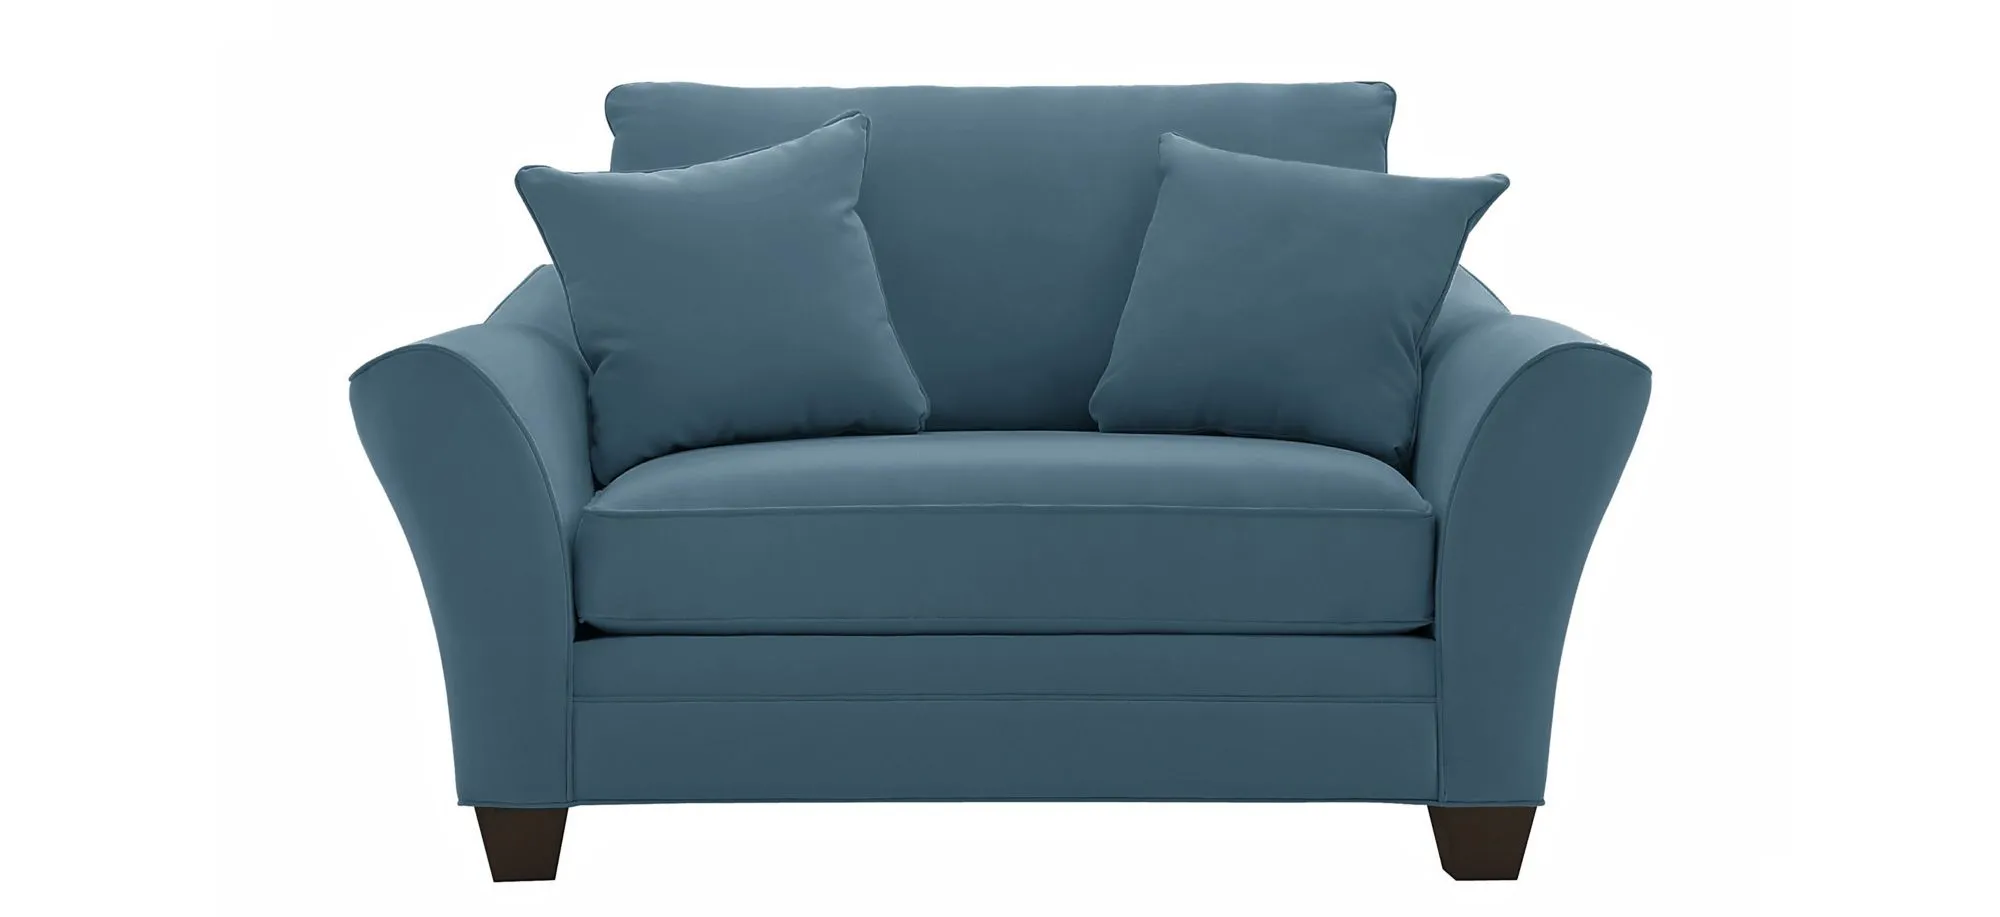 Briarwood Chair-and-a-Half in Suede So Soft Indigo by H.M. Richards